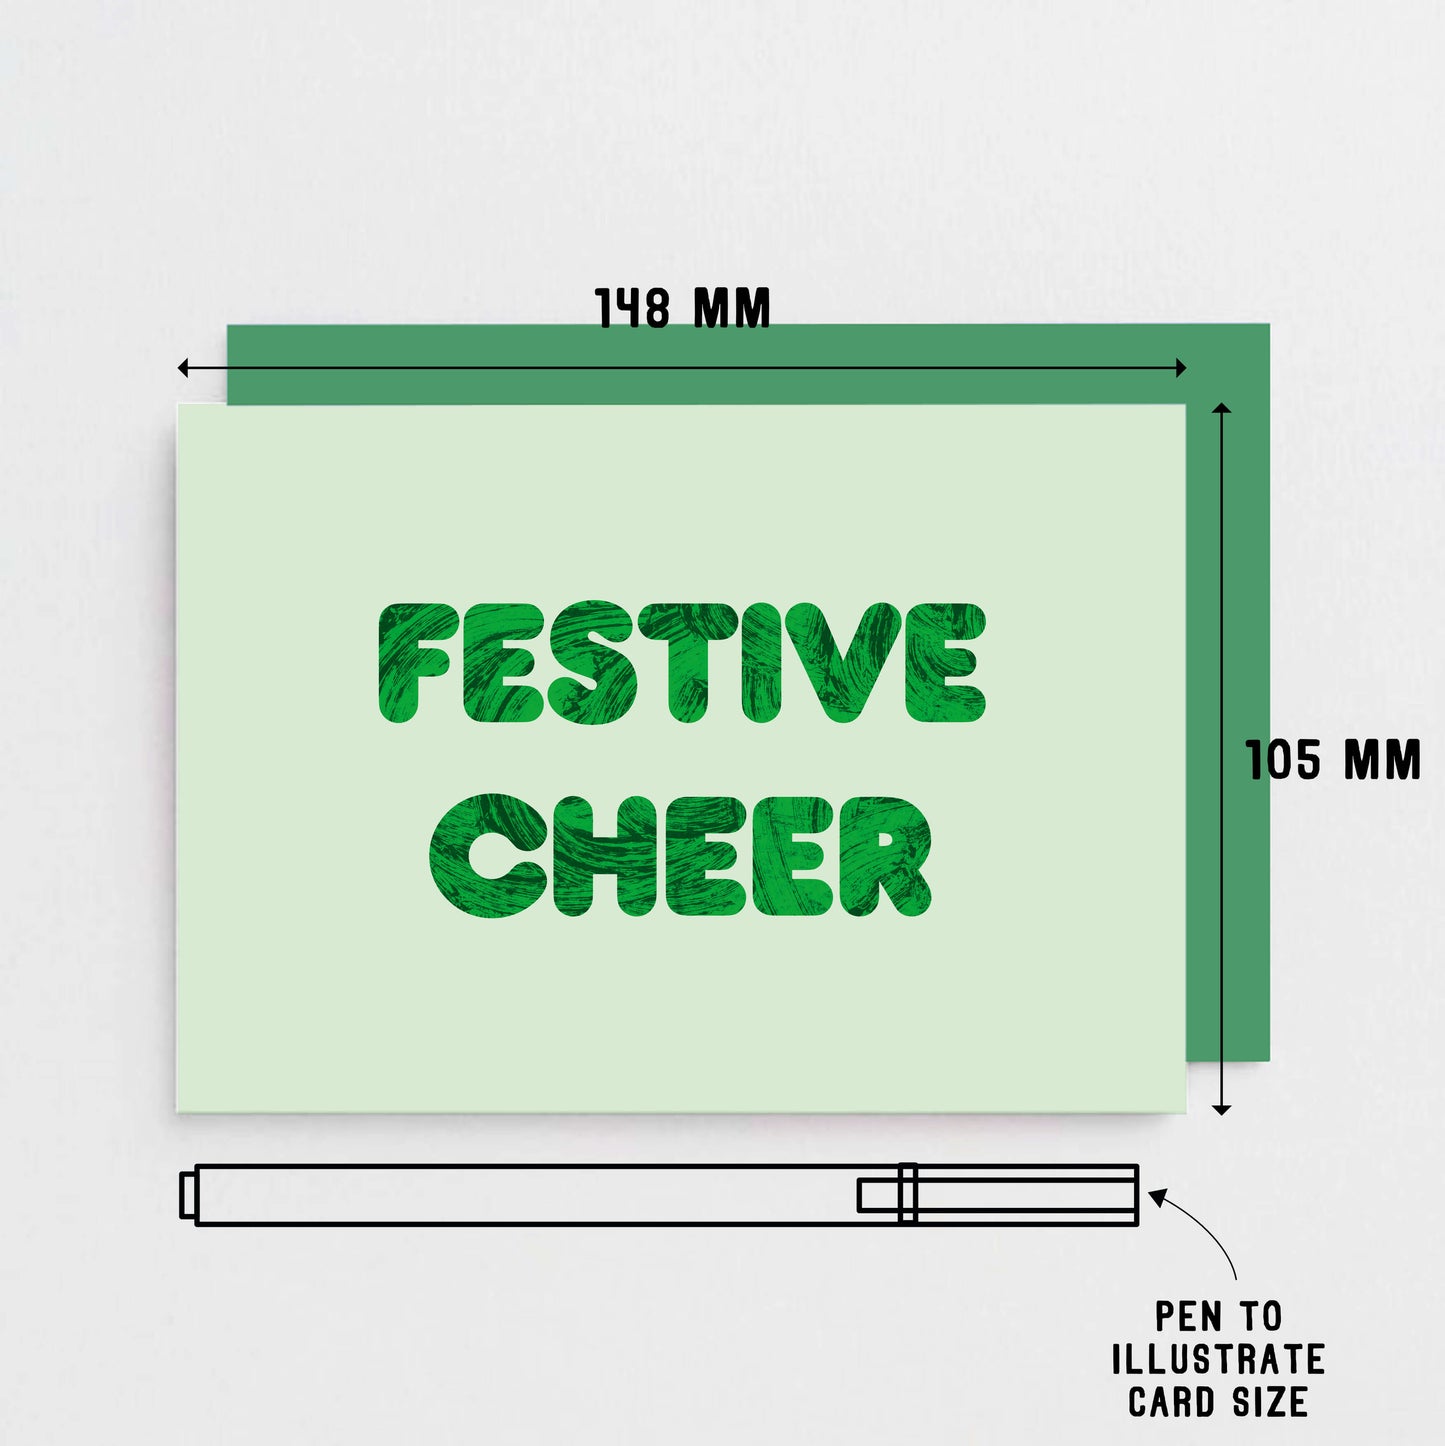 Festive Cheer Card by SixElevenCreations. Product Code SEC0102A6